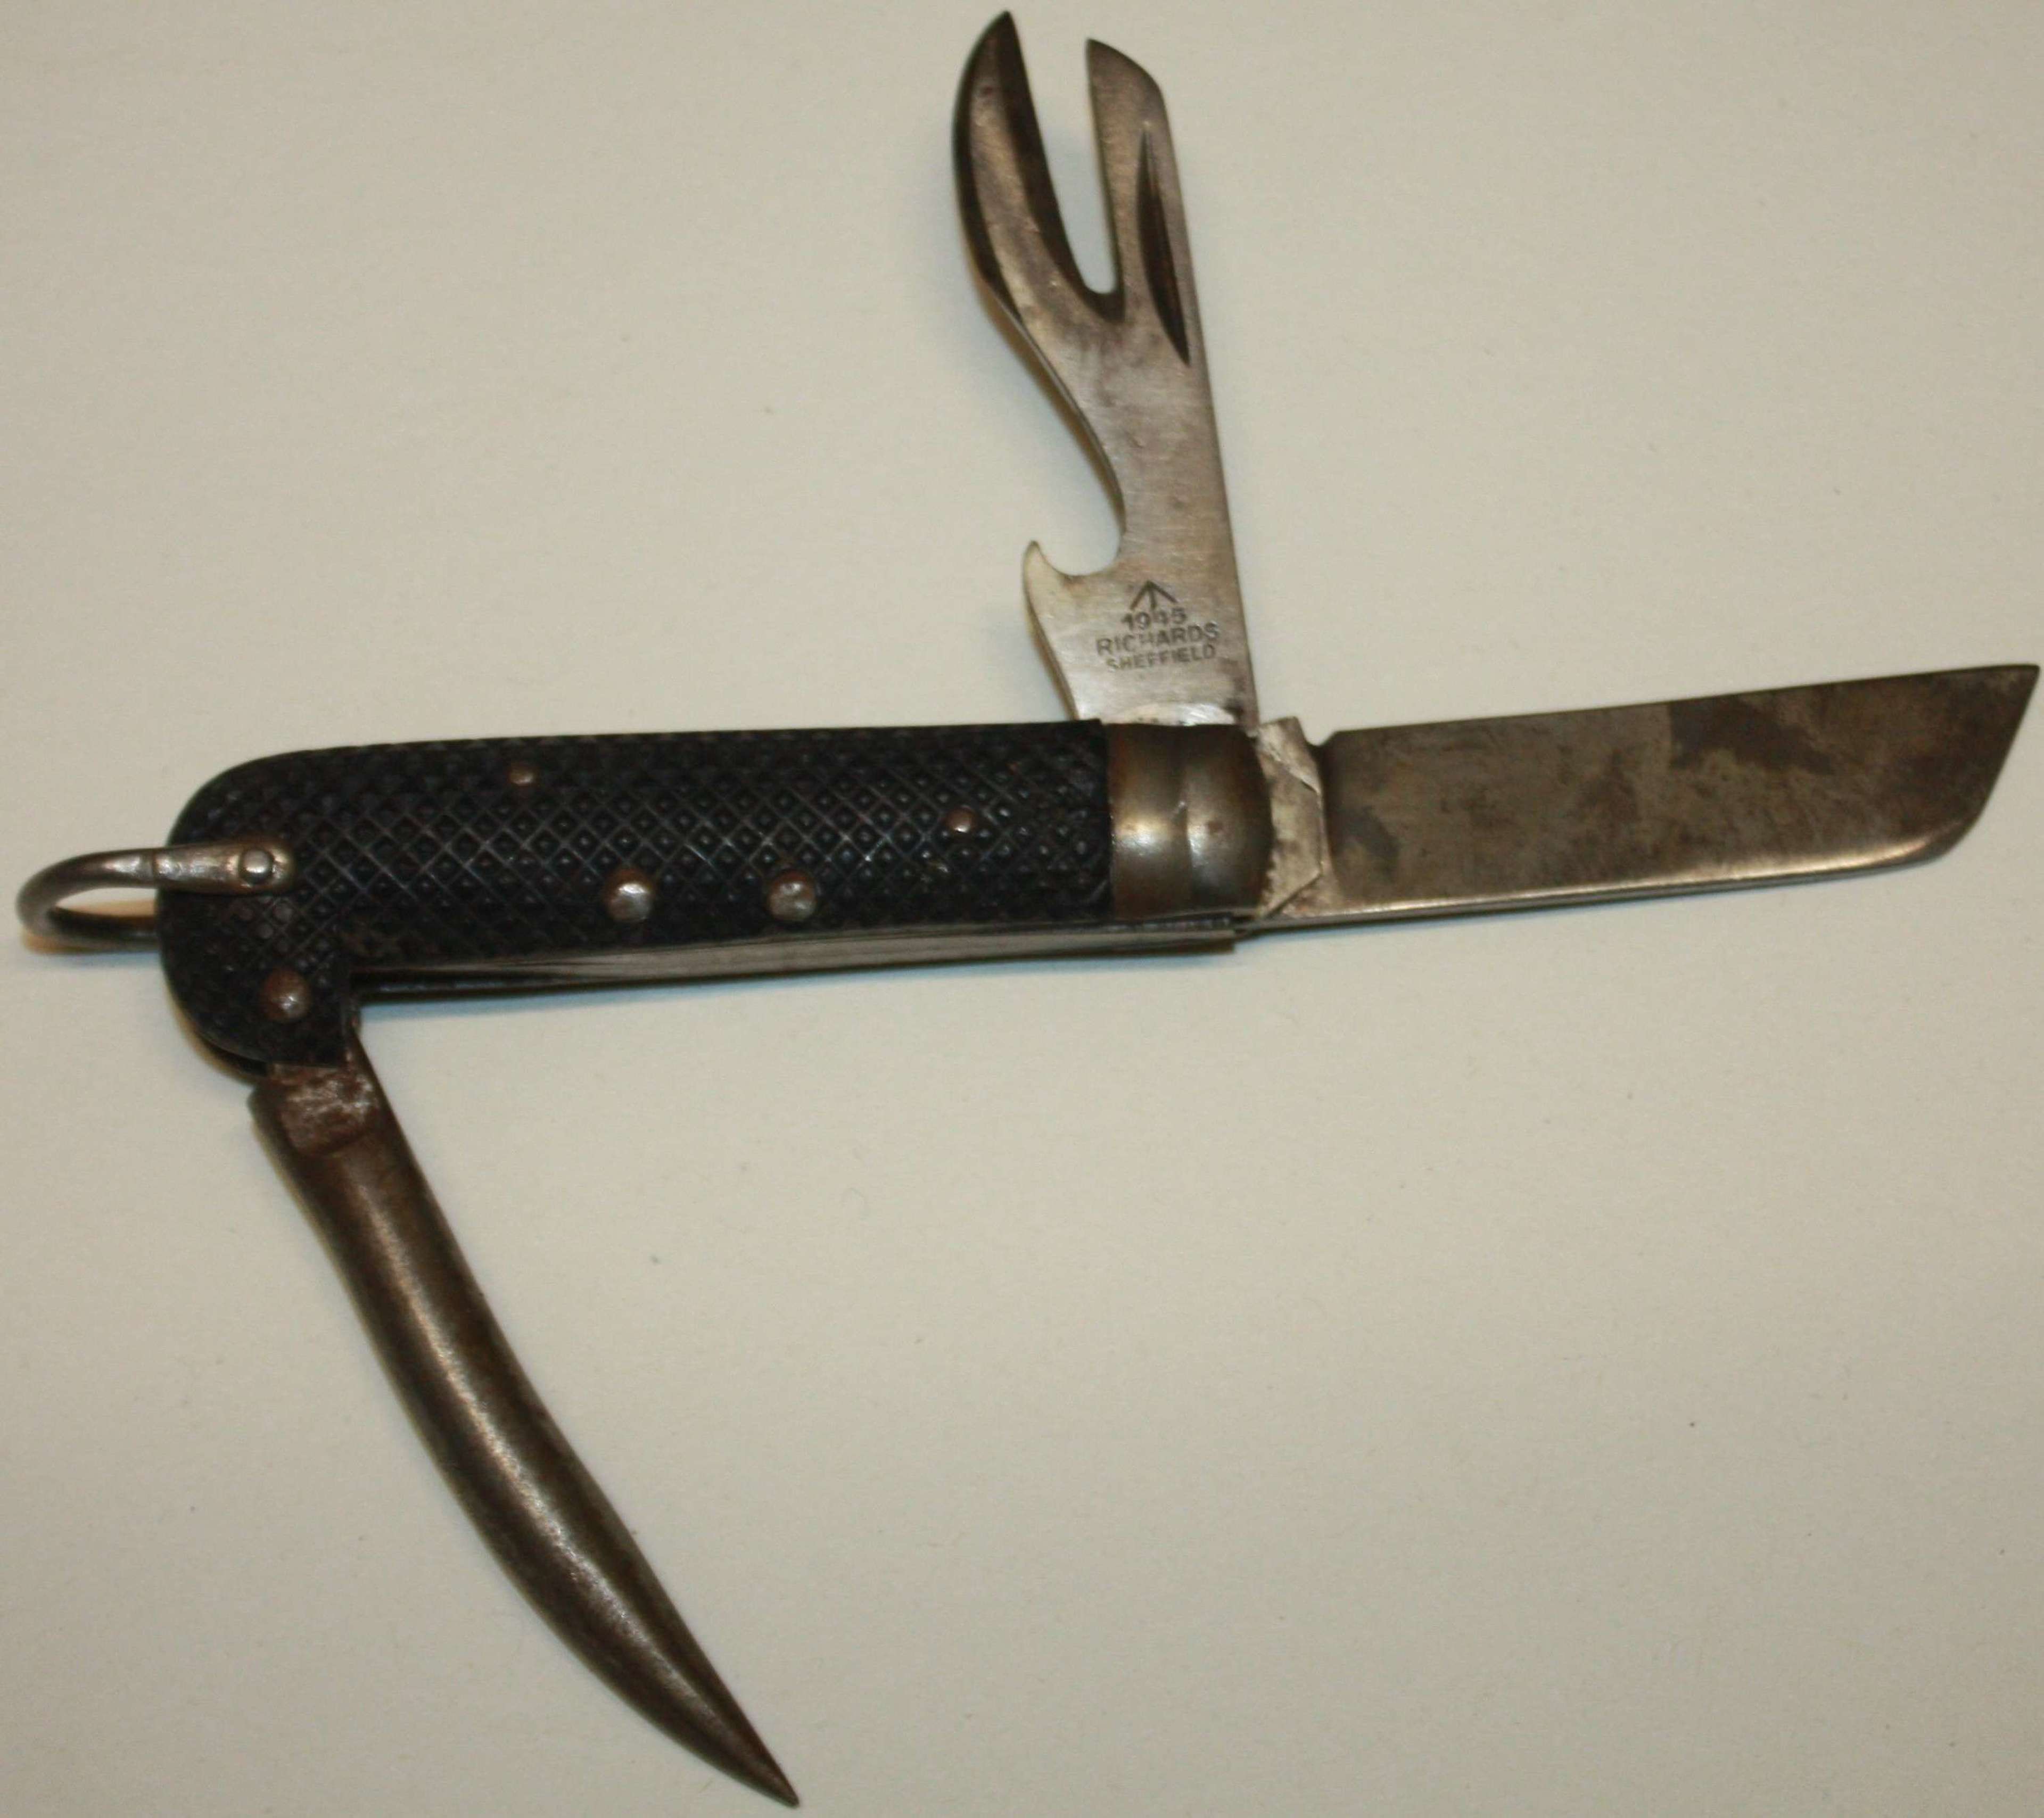 A GOOD LATE WAR BOTTLE OPERNER 3 BLADED BRITISH ARMY CLASP KNIFE